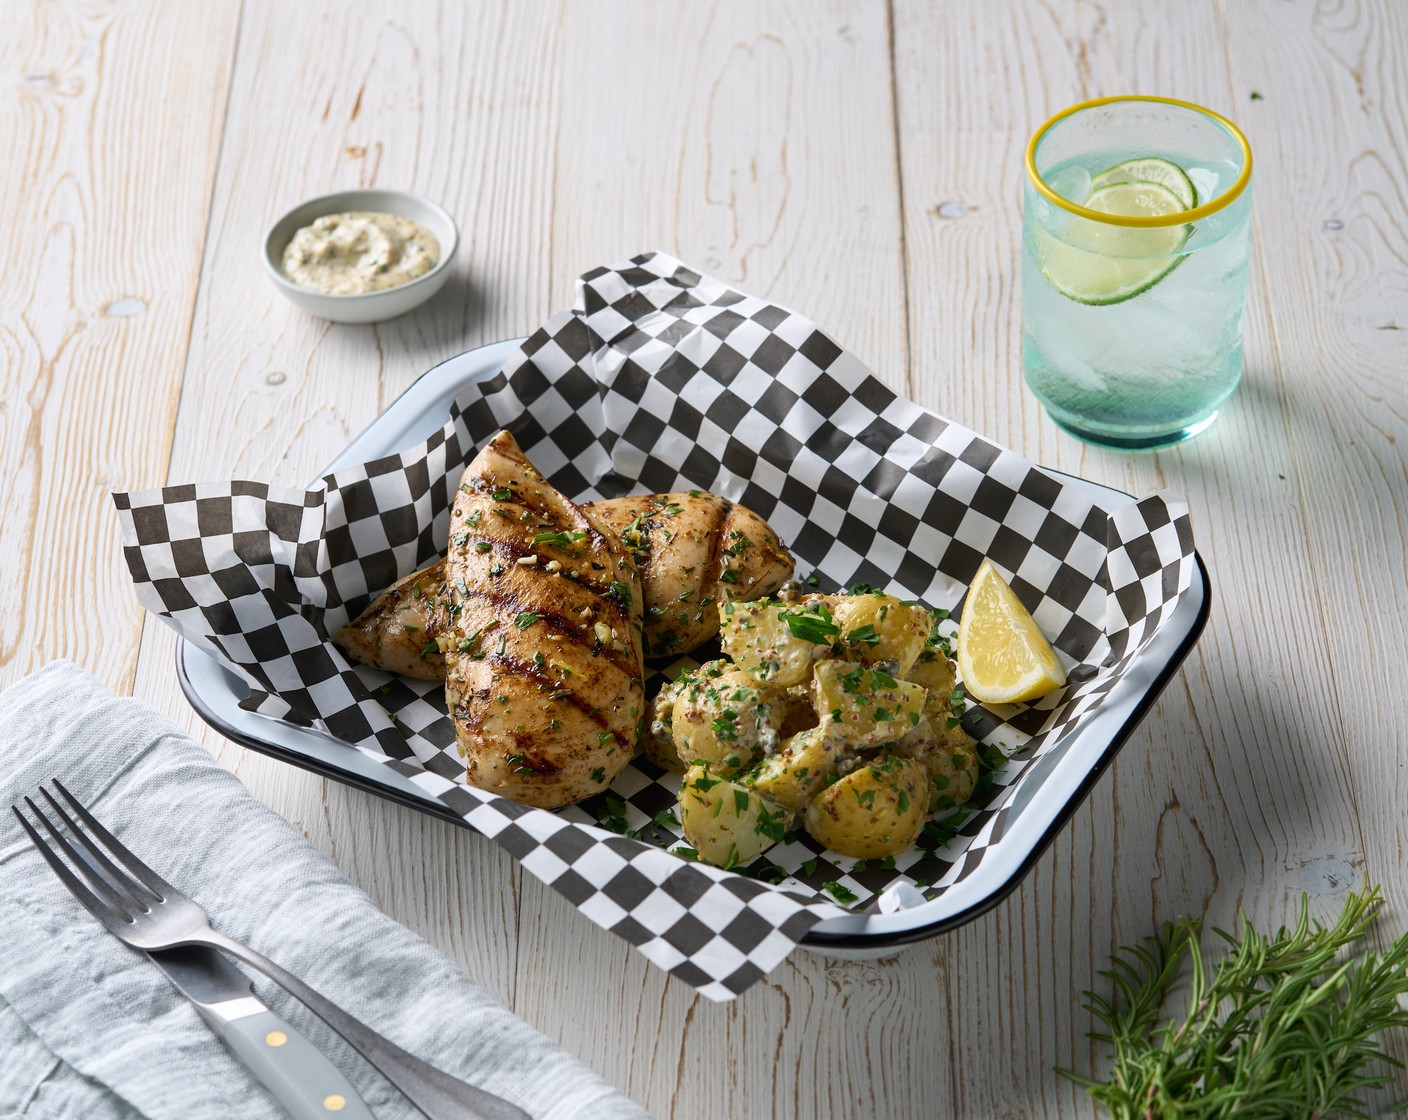 Sally's Grilled Chicken and Potato Salad